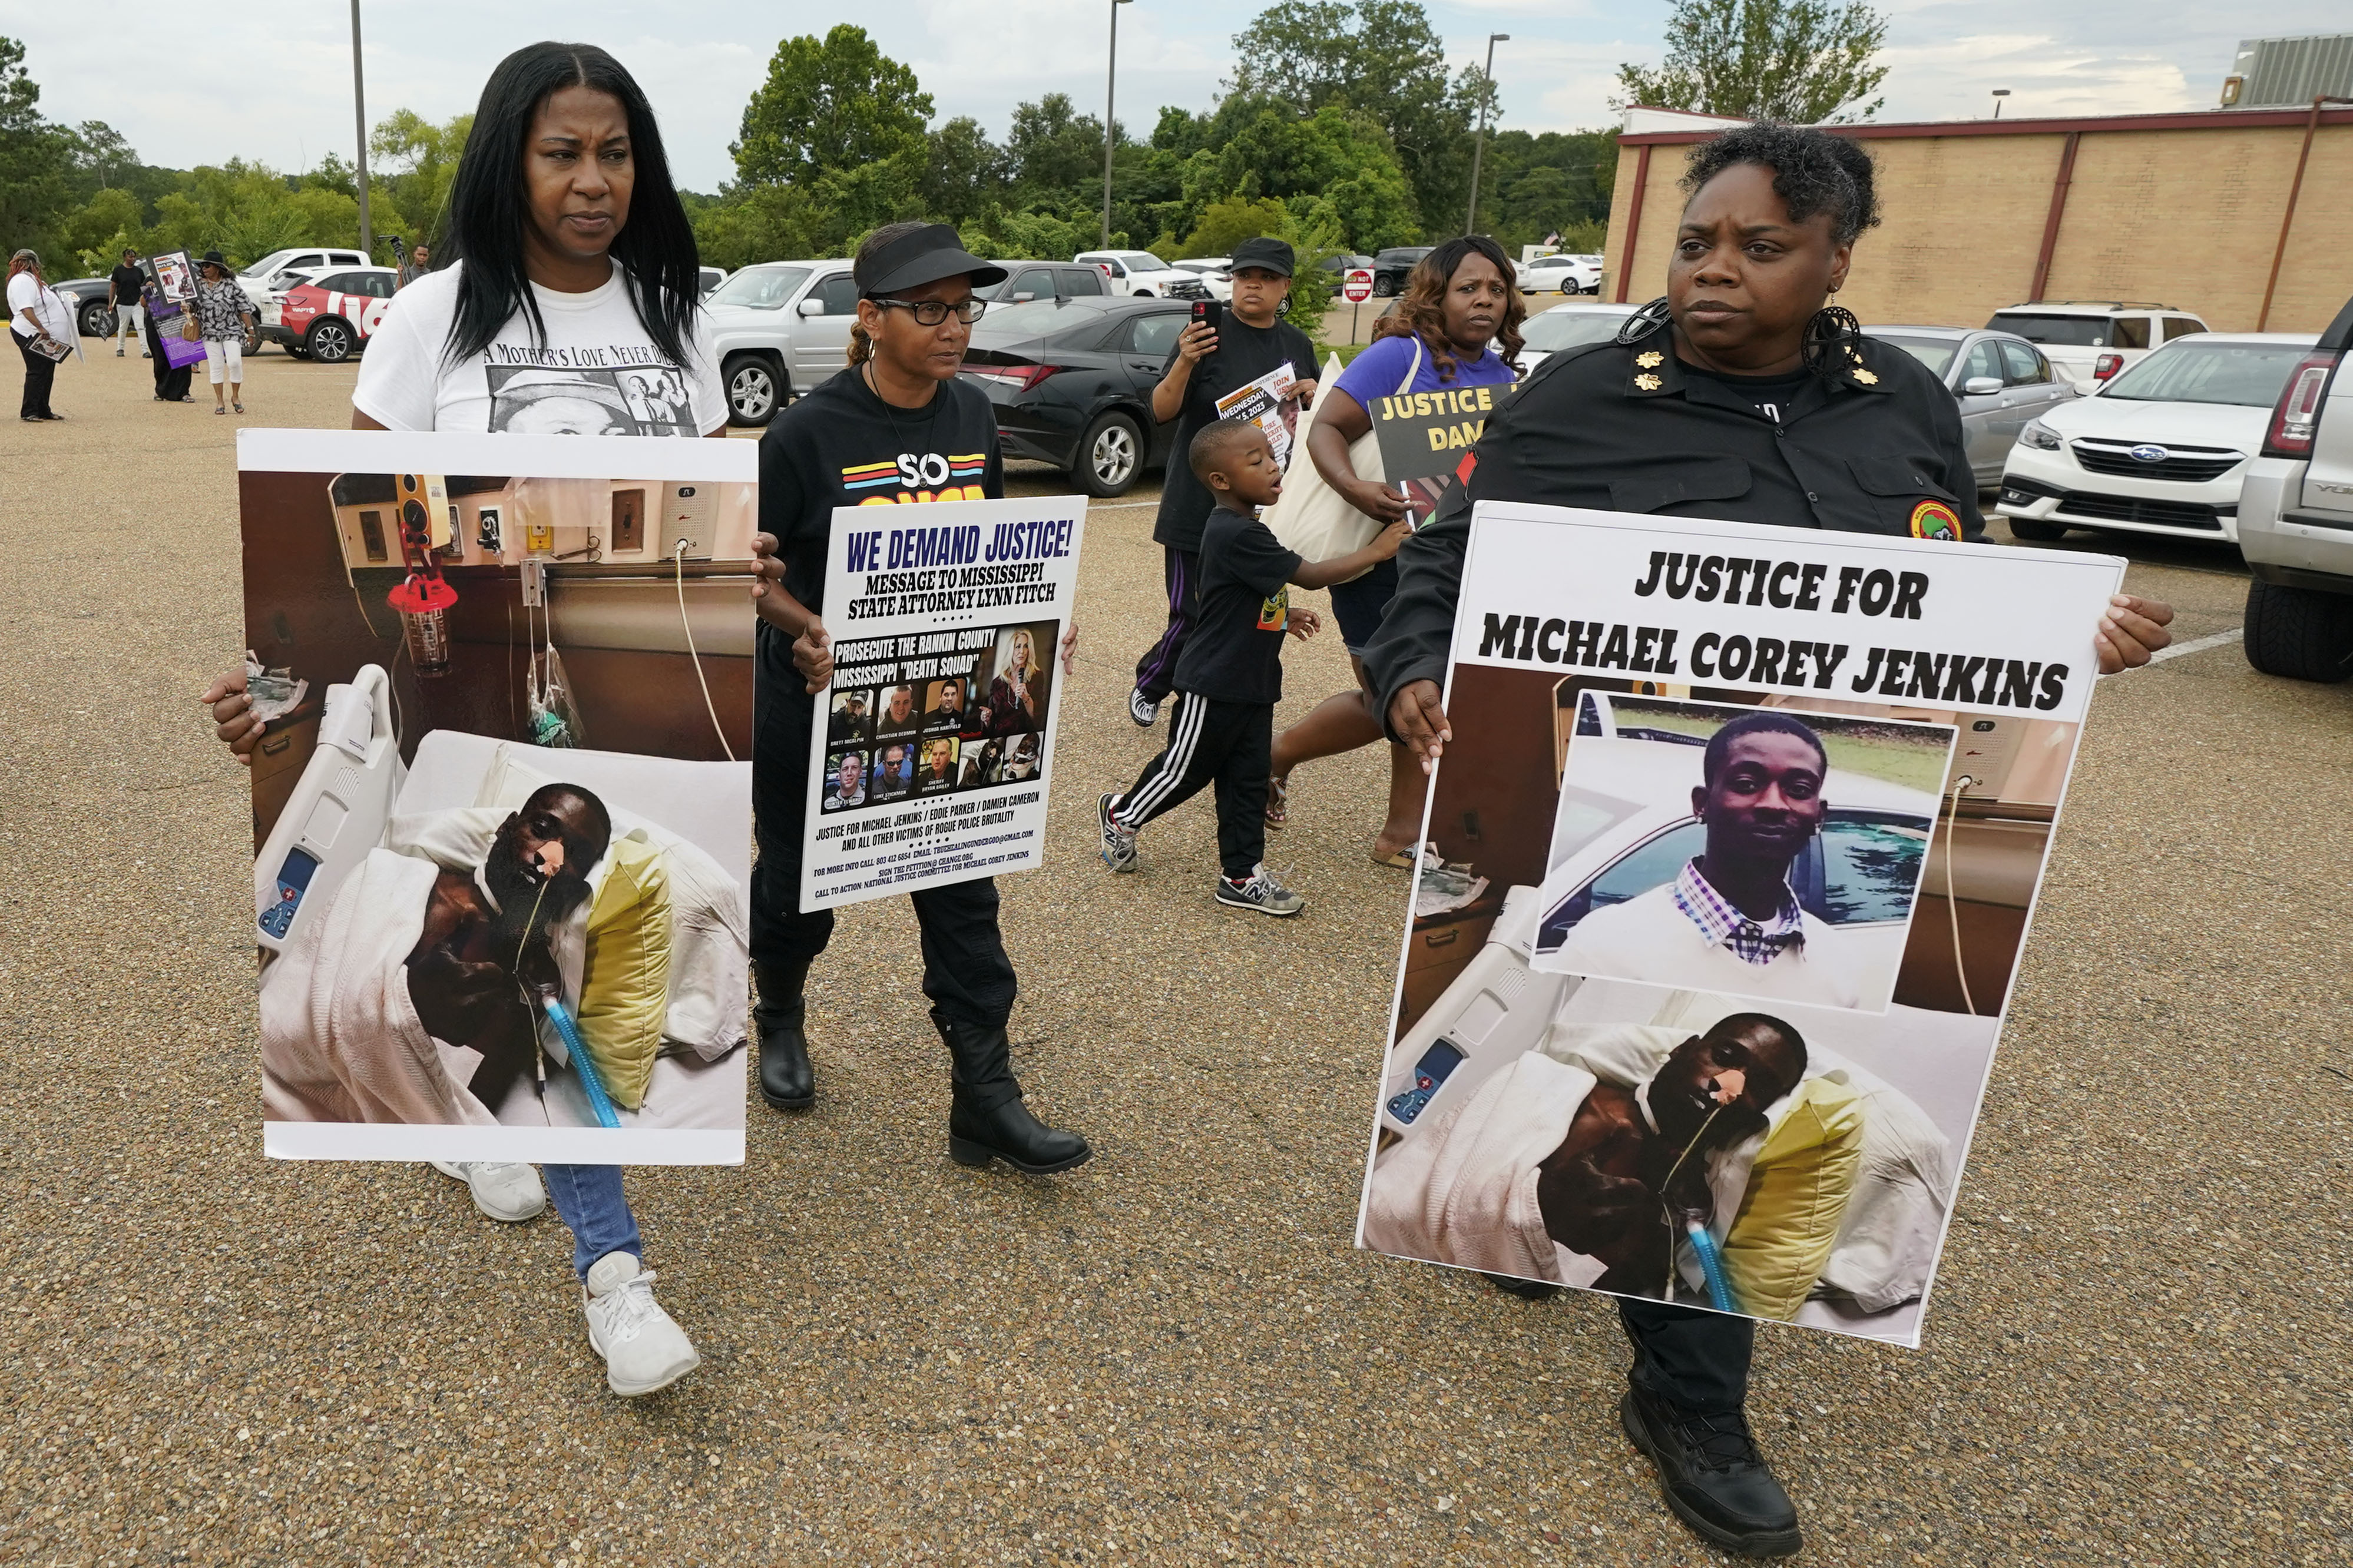 Black women hold signs displaying Parker and Jenkins’ wounds that read “We Demand Justice” and “Justice for Michael Corey Jenkins.”